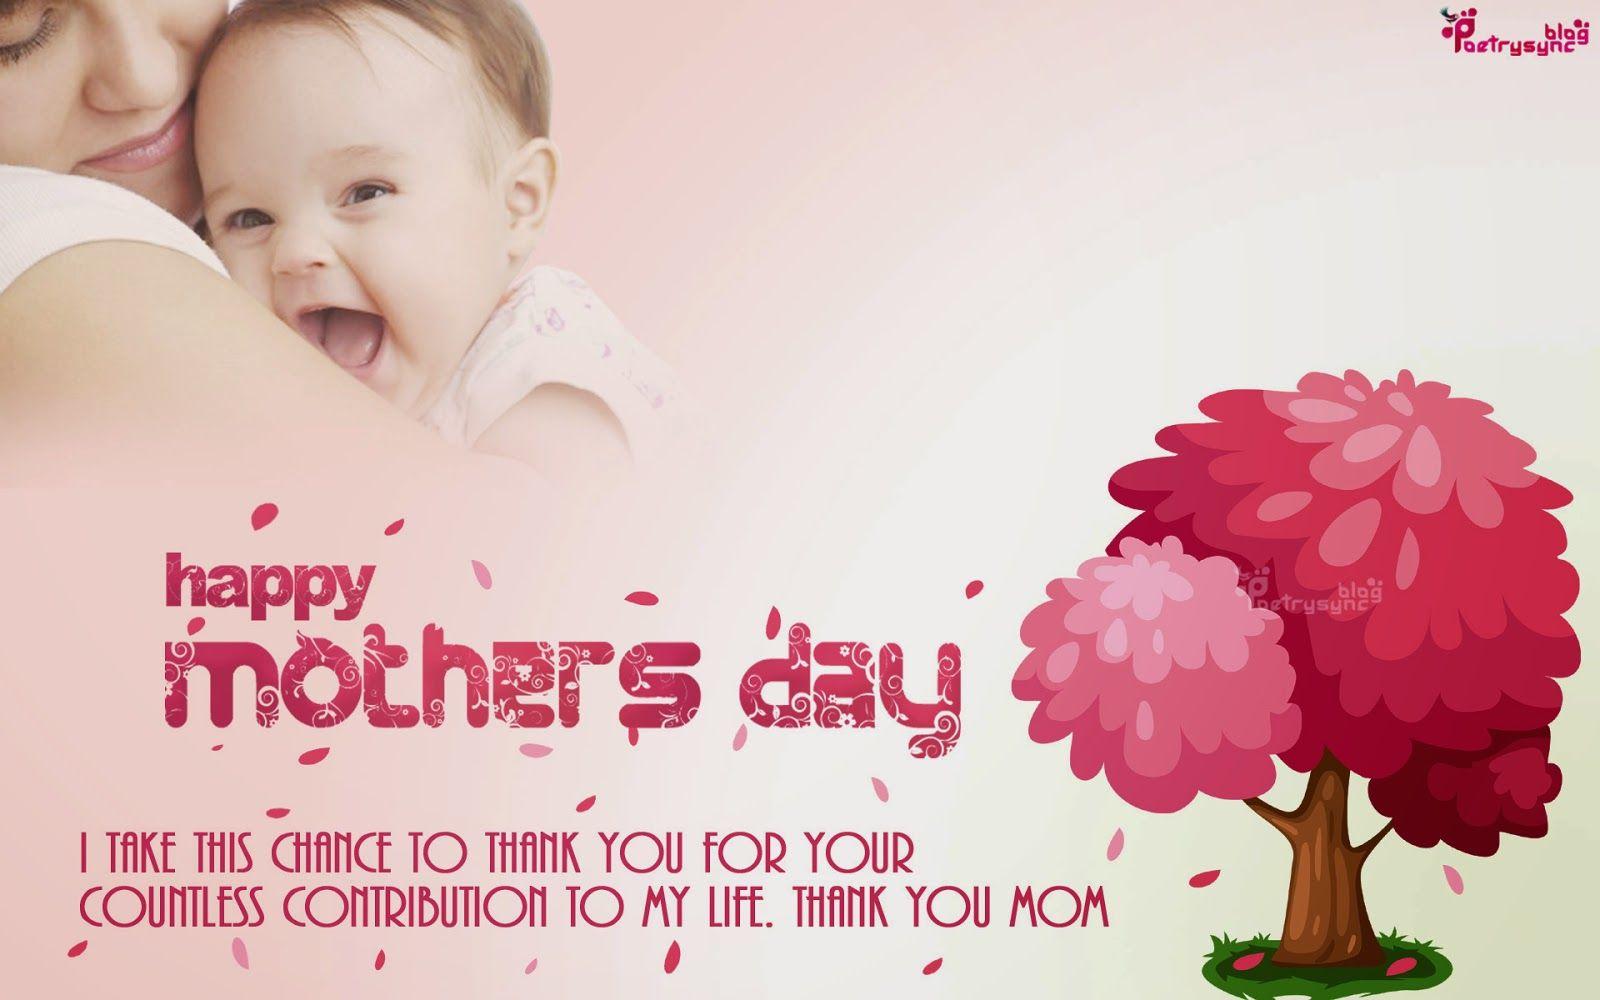 Happy Mothers Day Greetings Wallpaper with Messages. Happy